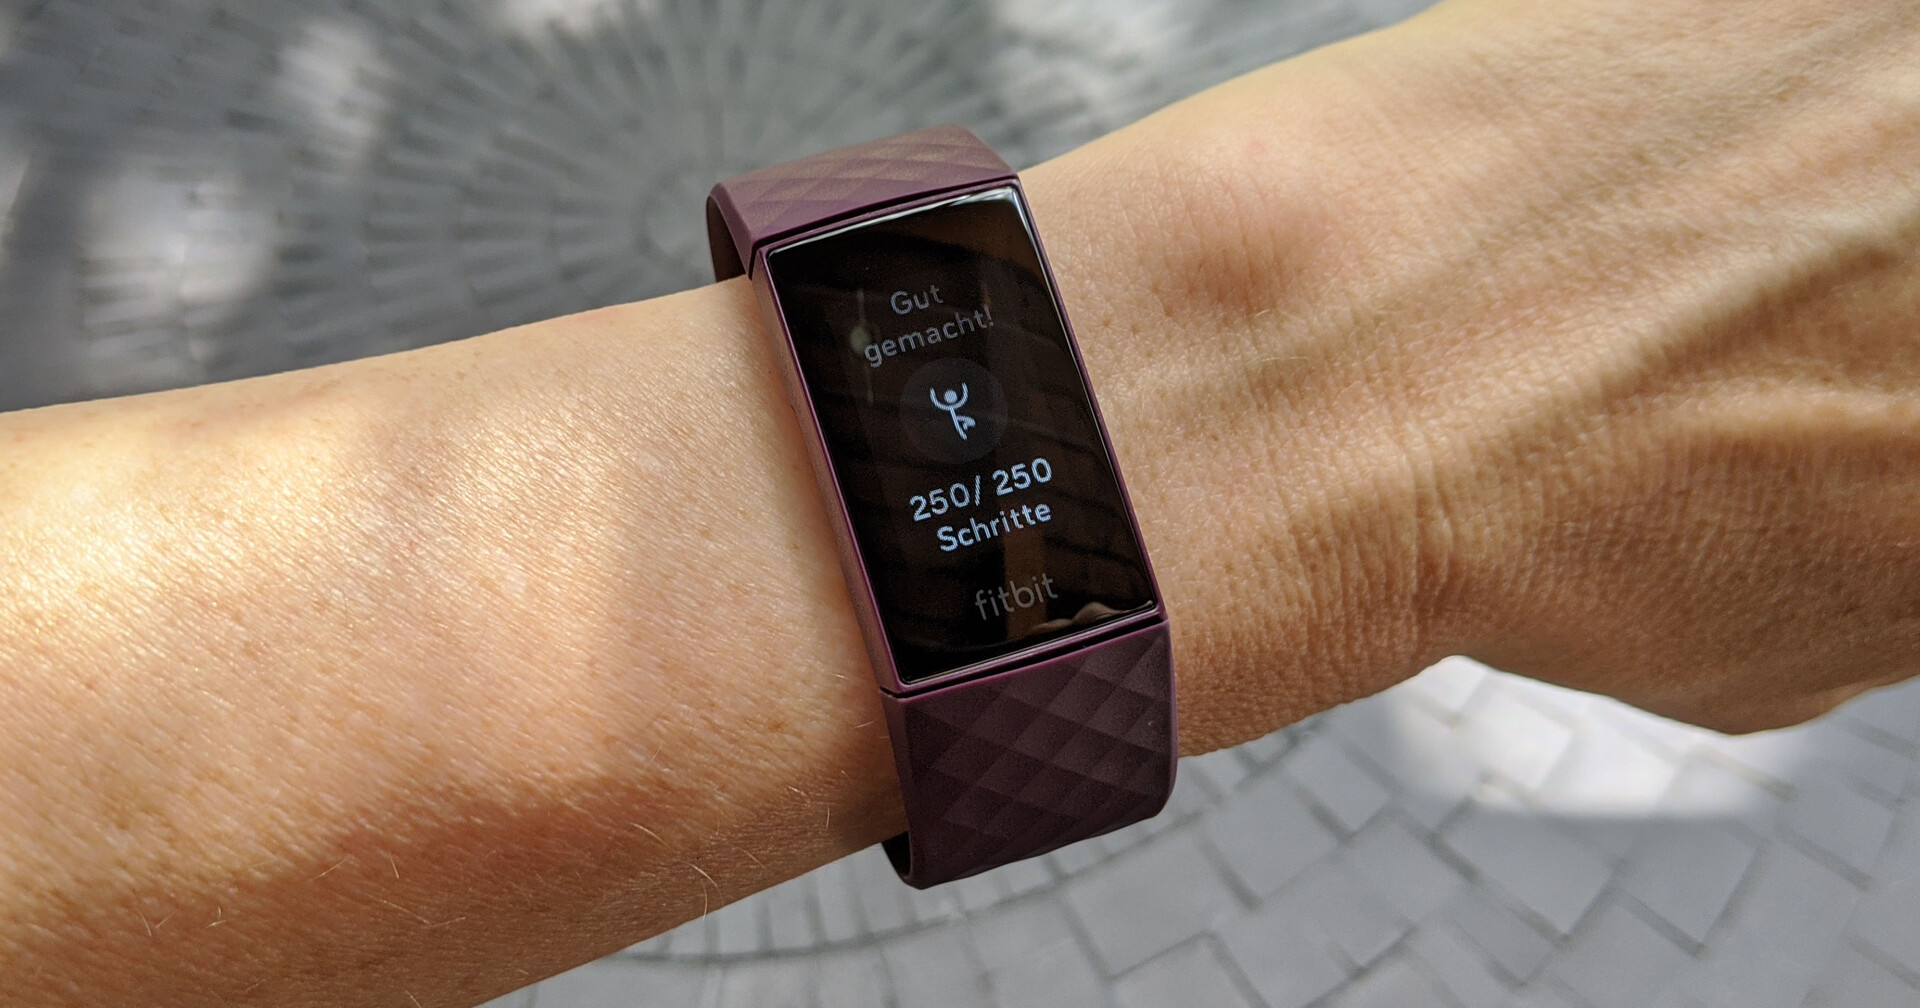 NEW Fitbit Charge 4 Activity Tracker GPS HR Rosewood